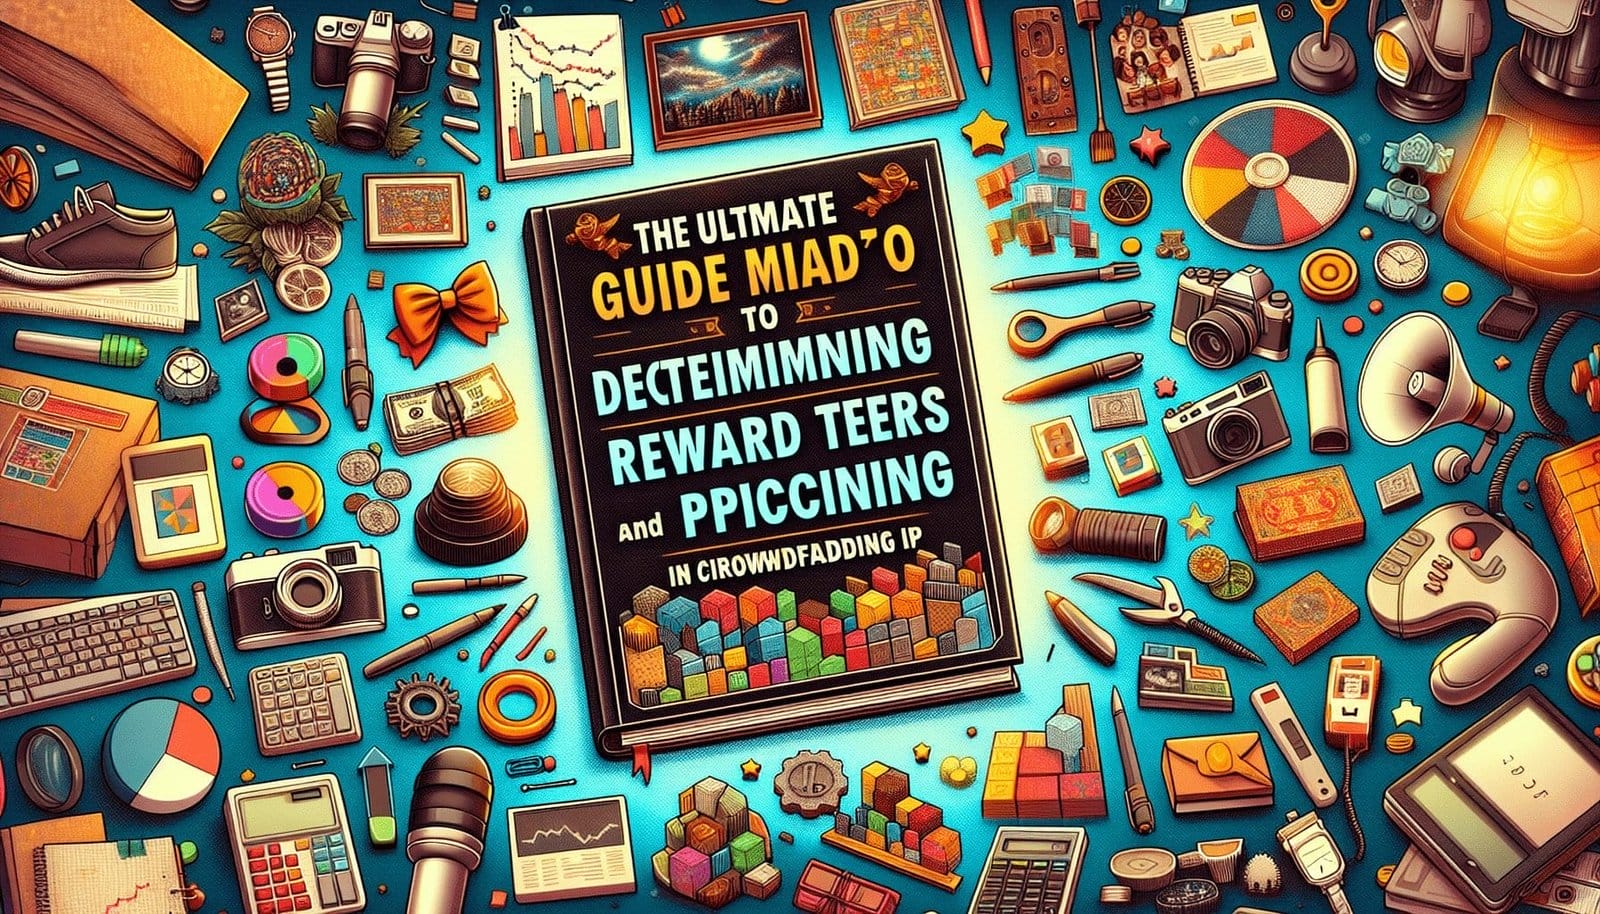 You are currently viewing The Ultimate Guide to Determining Reward Tiers and Pricing in Crowdfunding